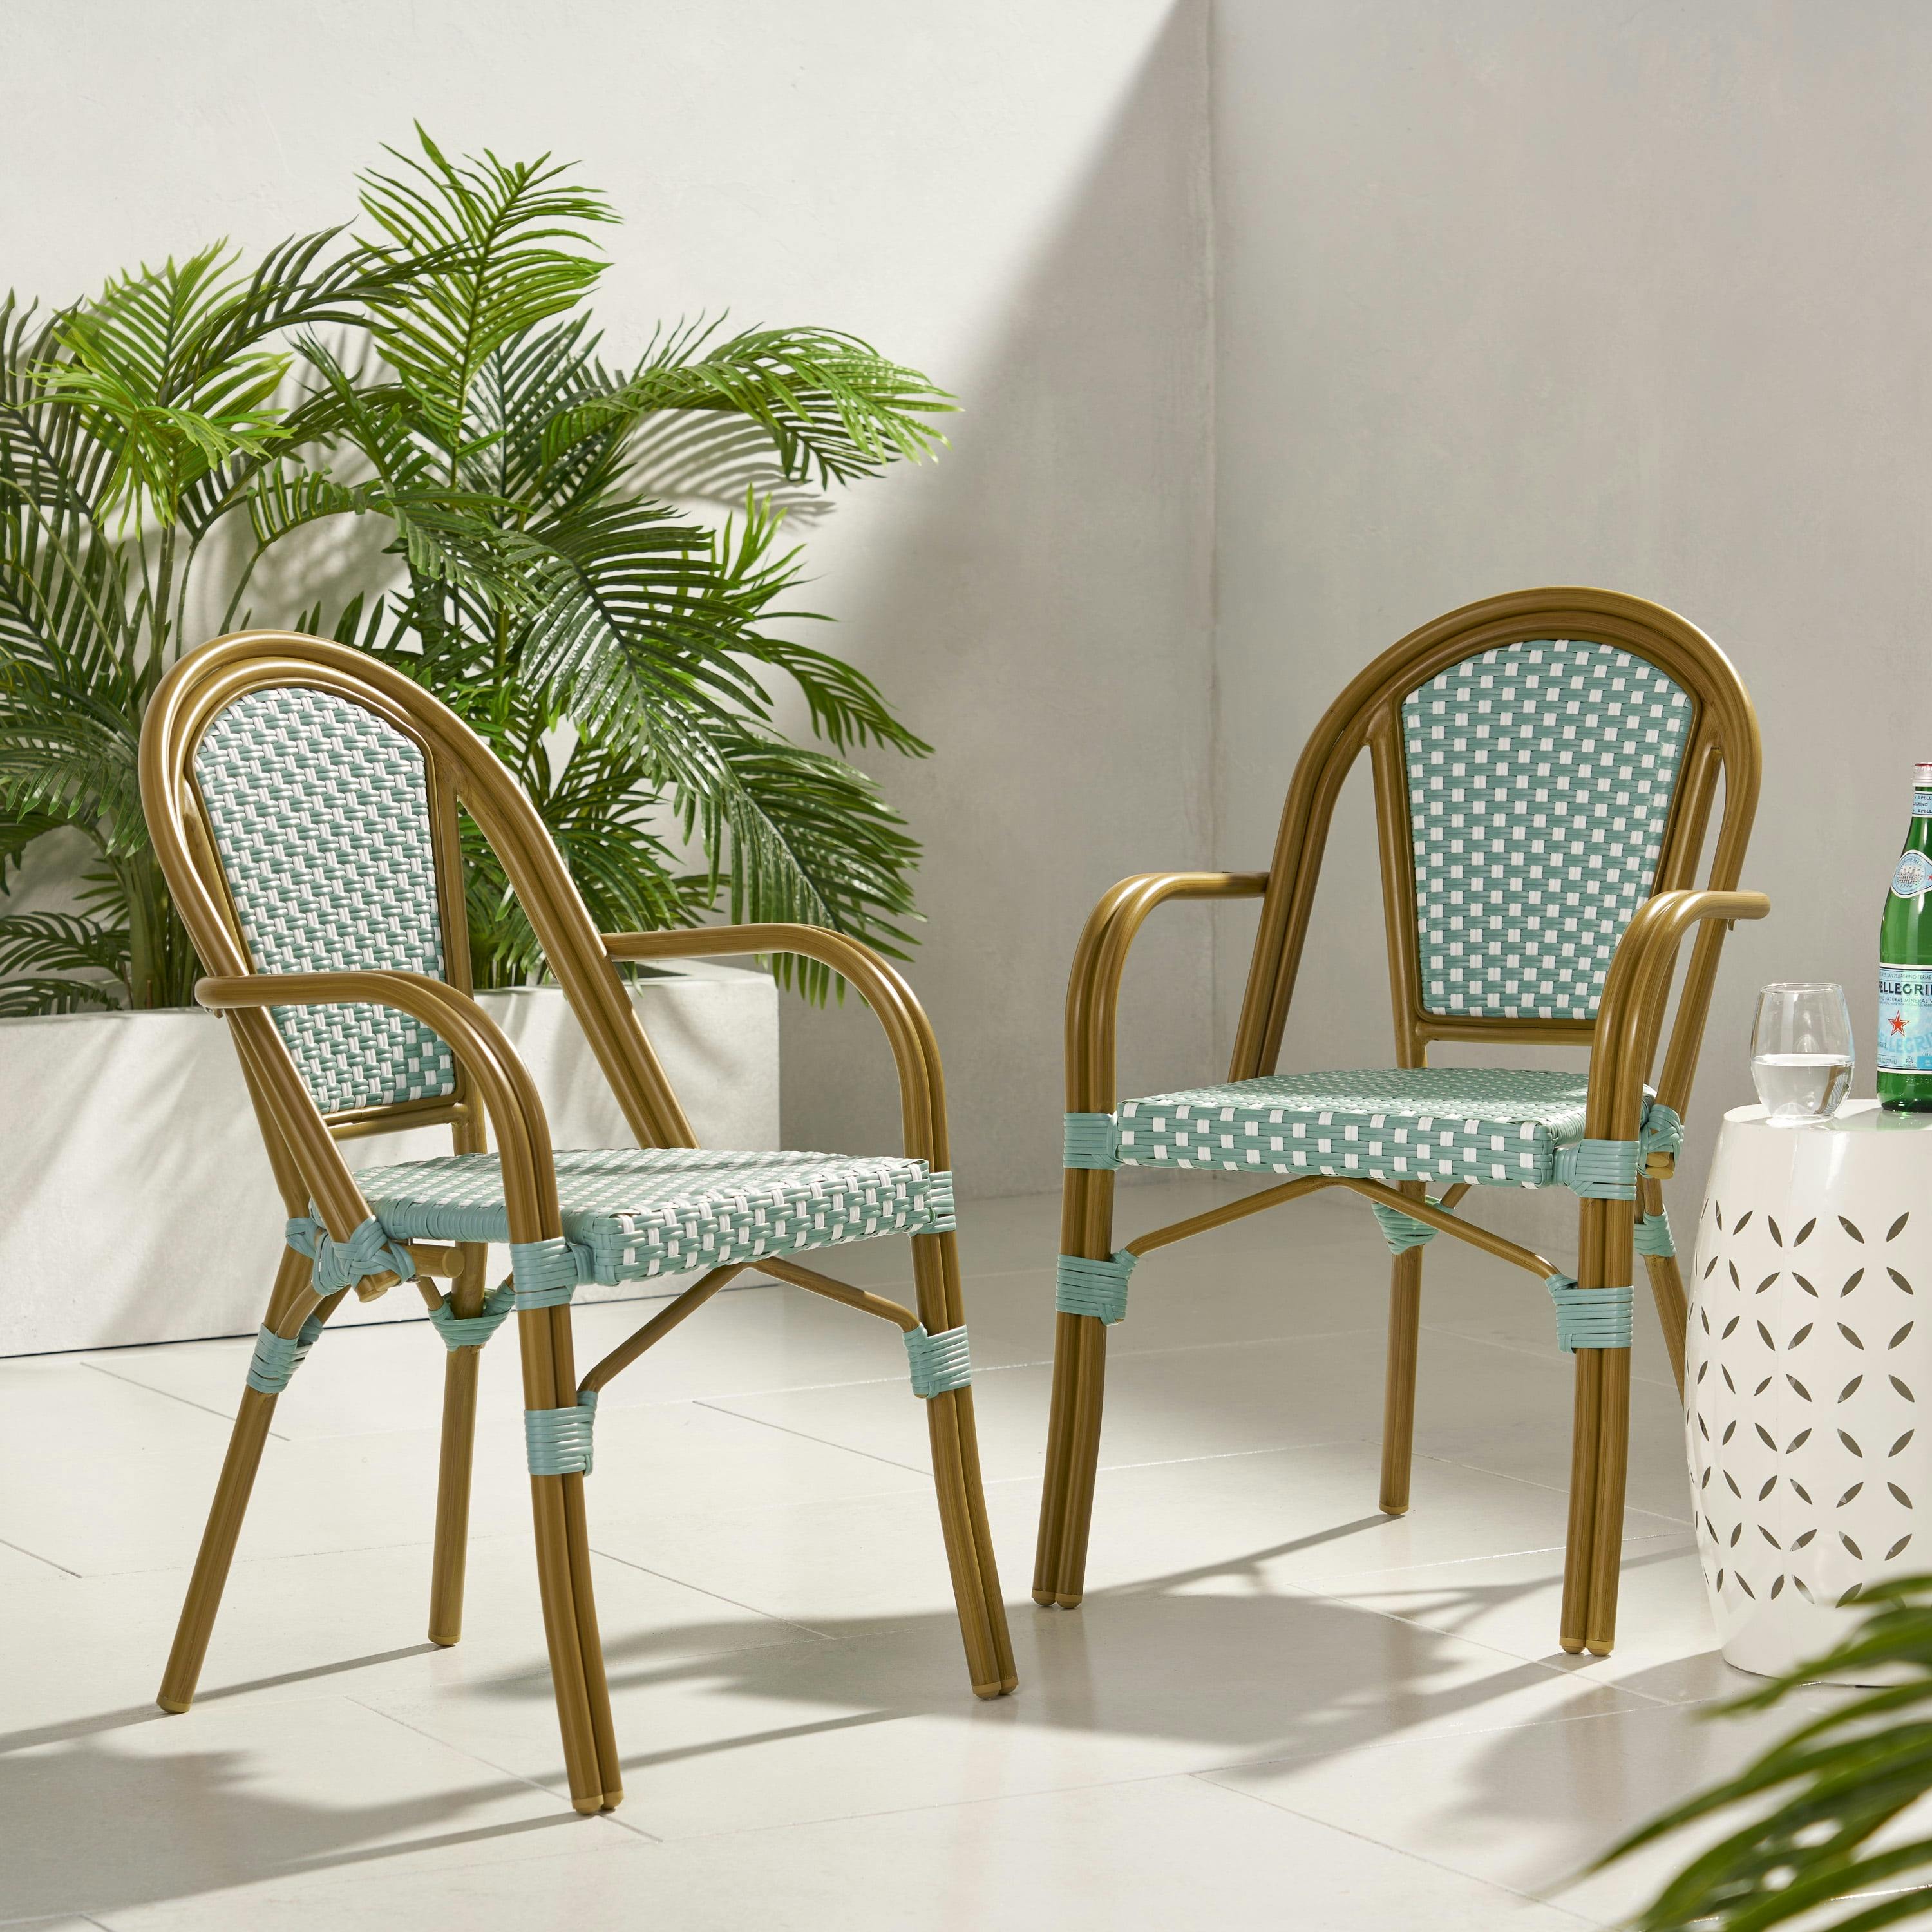 Sophisticated French-Country Light Teal & White Aluminum Bistro Chairs, Set of 2